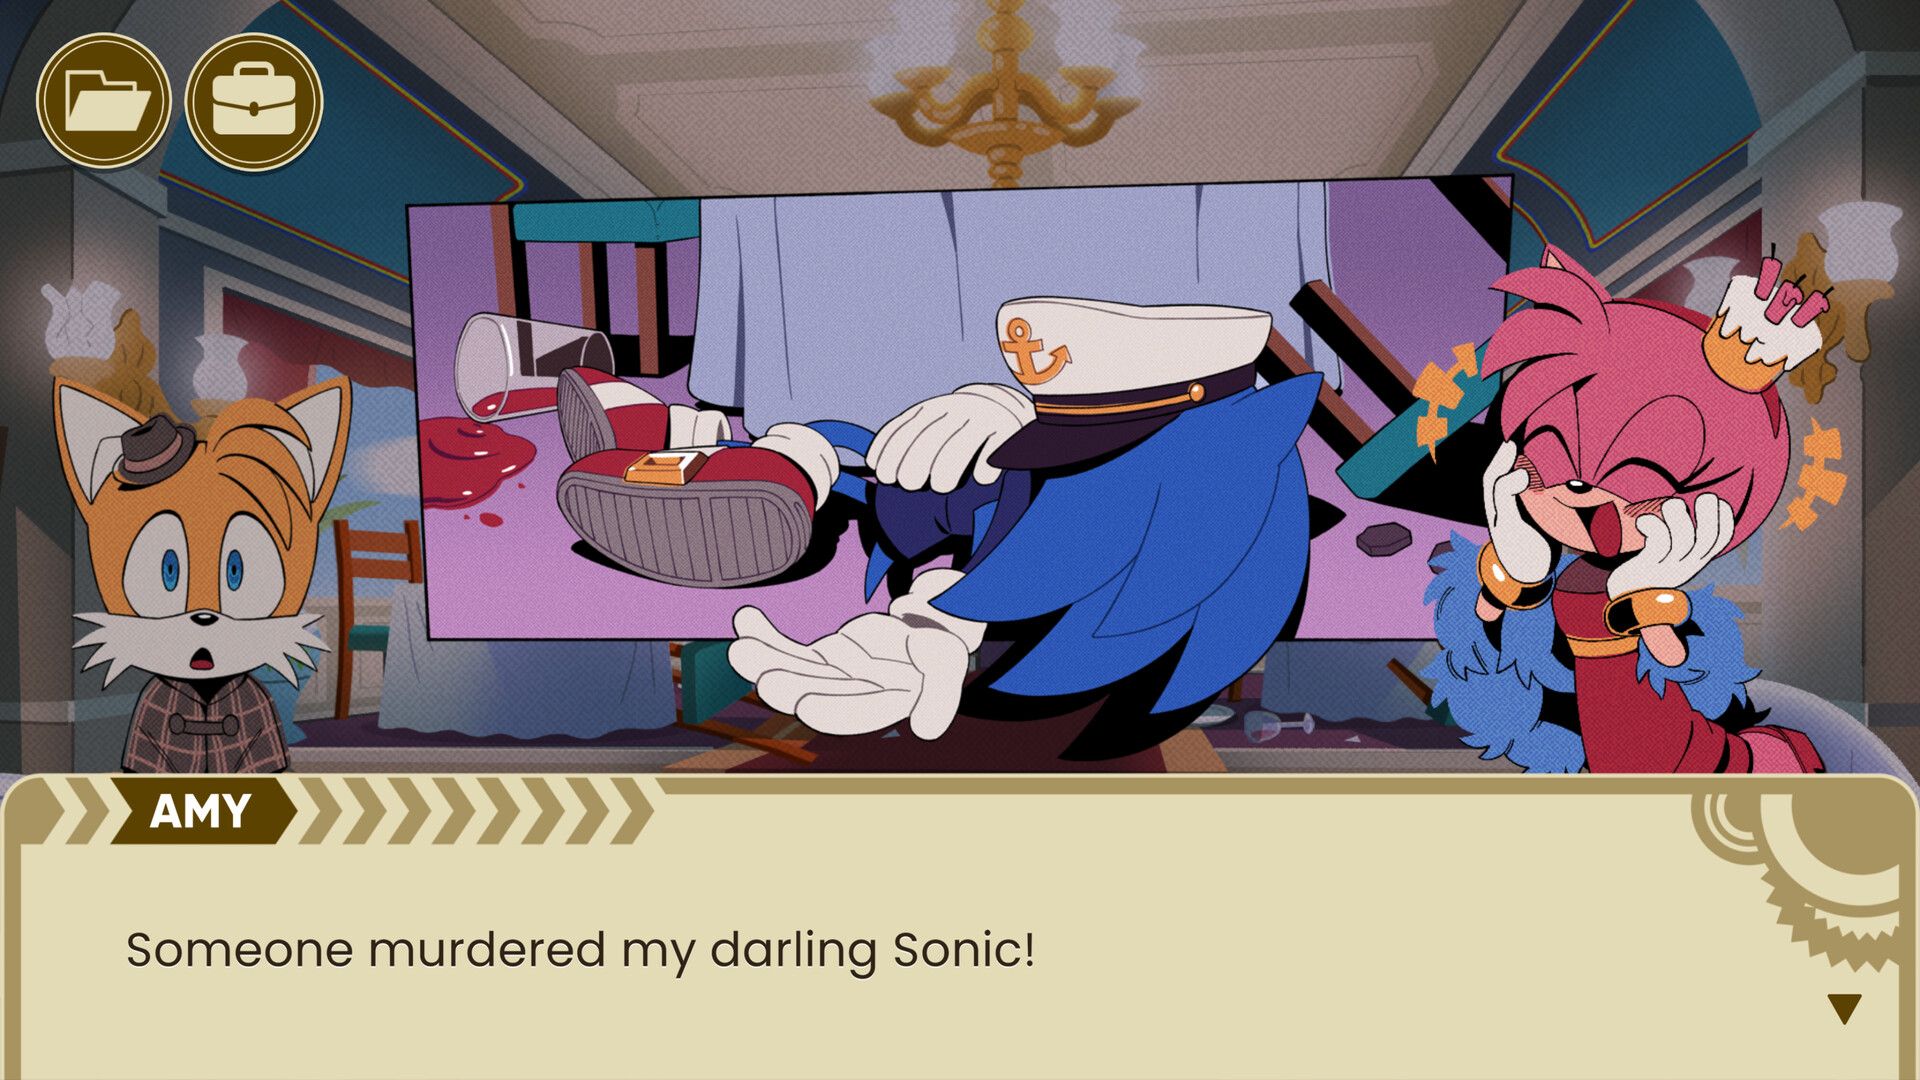 The Murder of Sonic the Hedgehog is Out Now for Free on PC